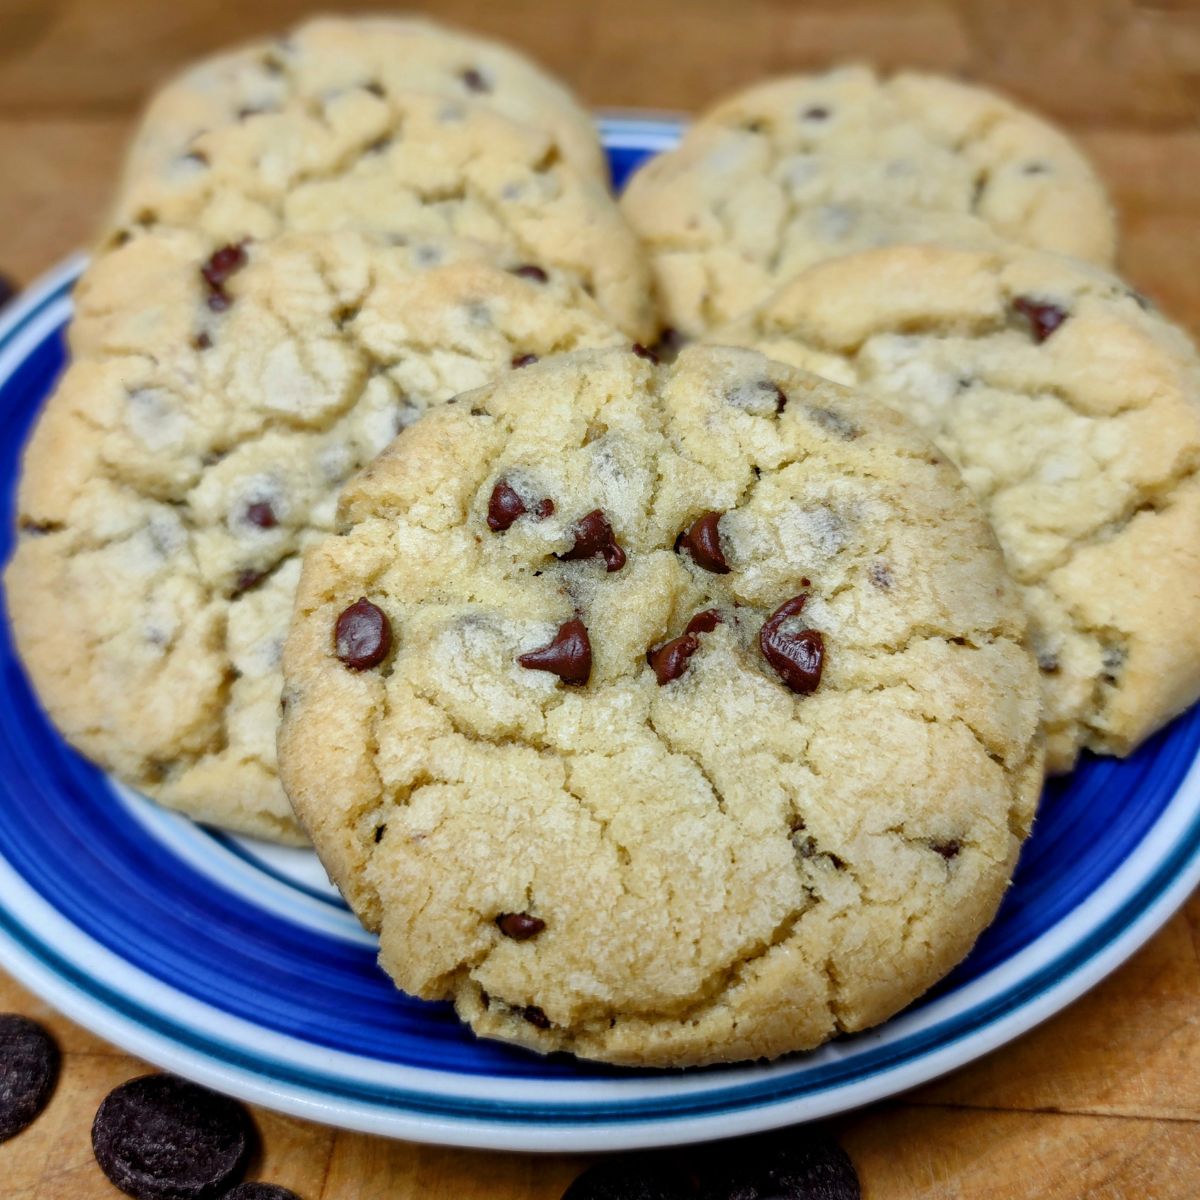 Crisco chocolate chip cookies on a plate.